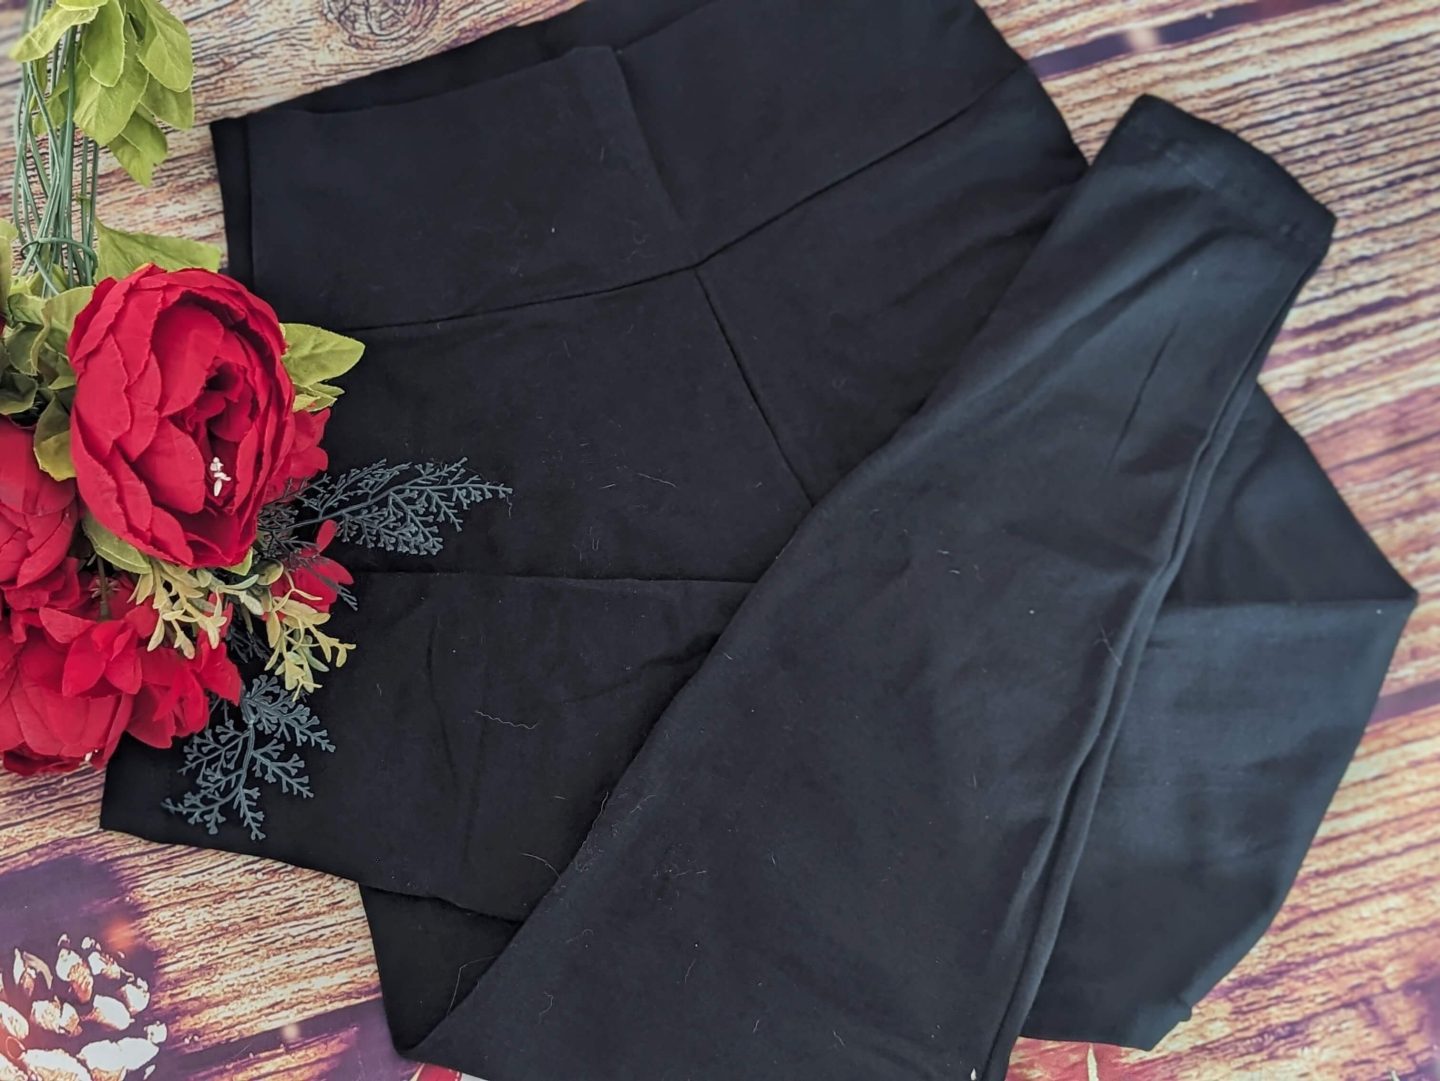 Black high waisted leggings from Lovall displayed against a wooden backdrop with red flowers beside